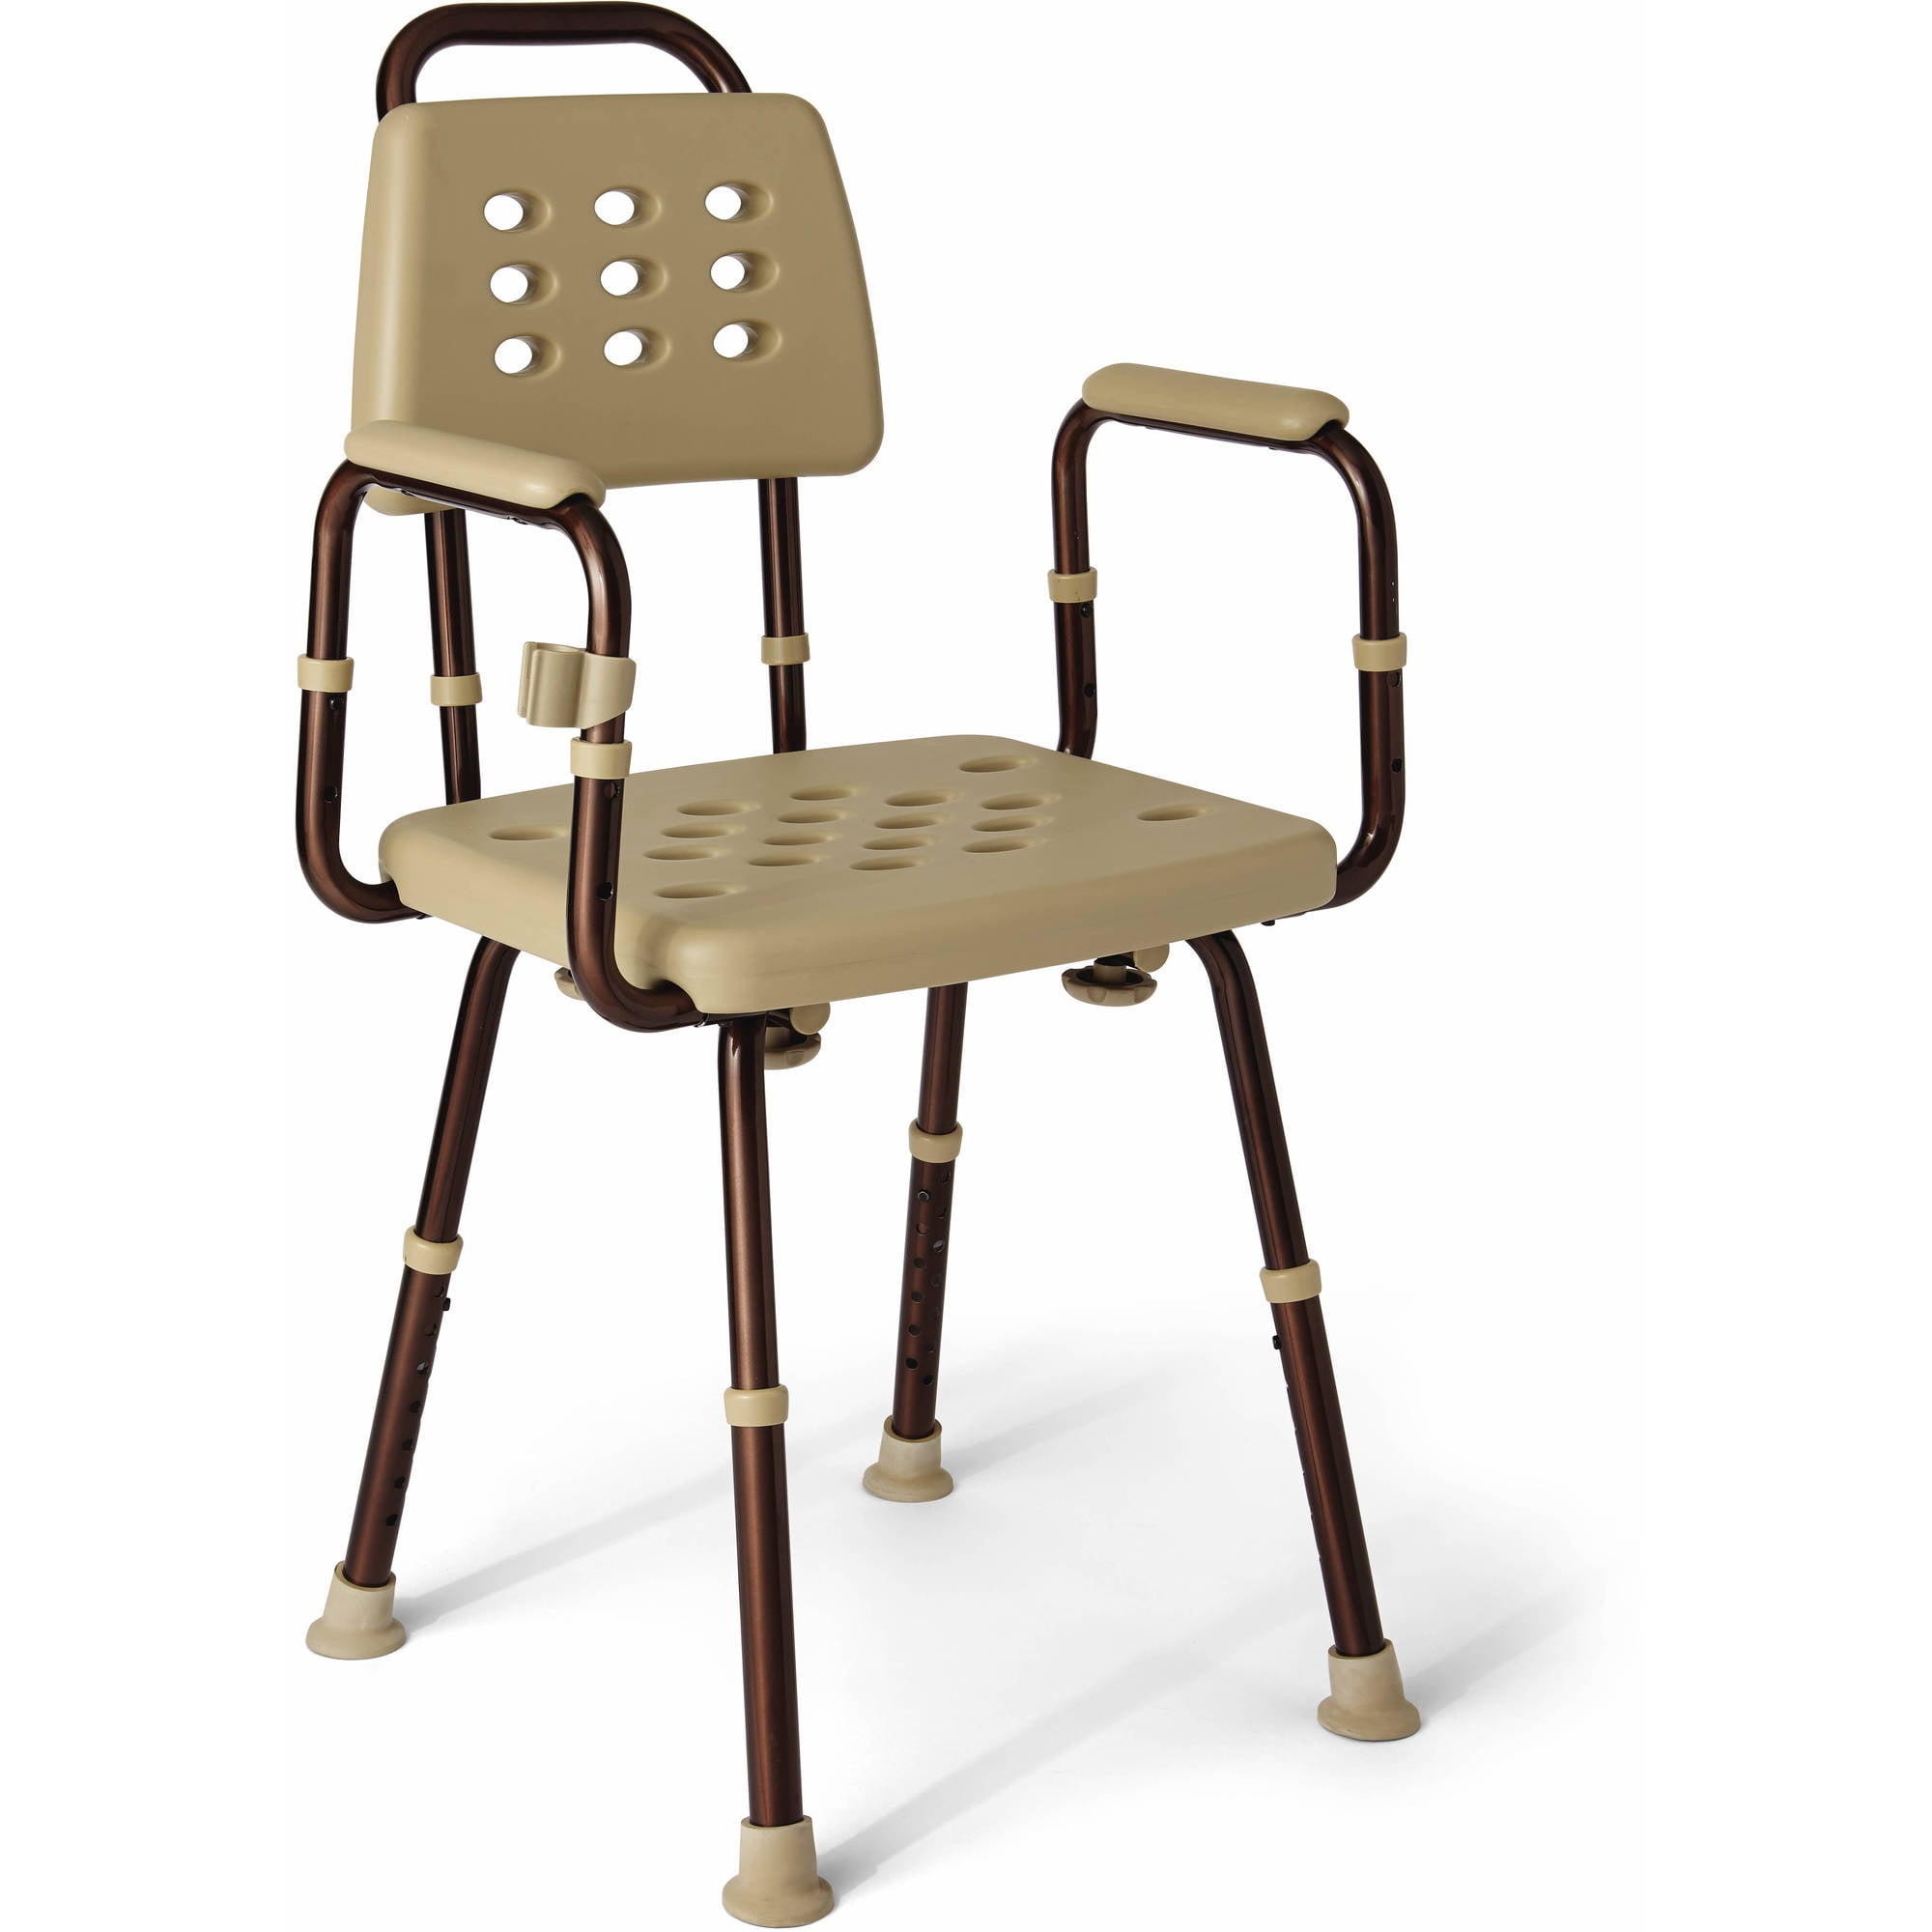 Medline Elements Adjustable Shower Chair With Microban Antimicrobial